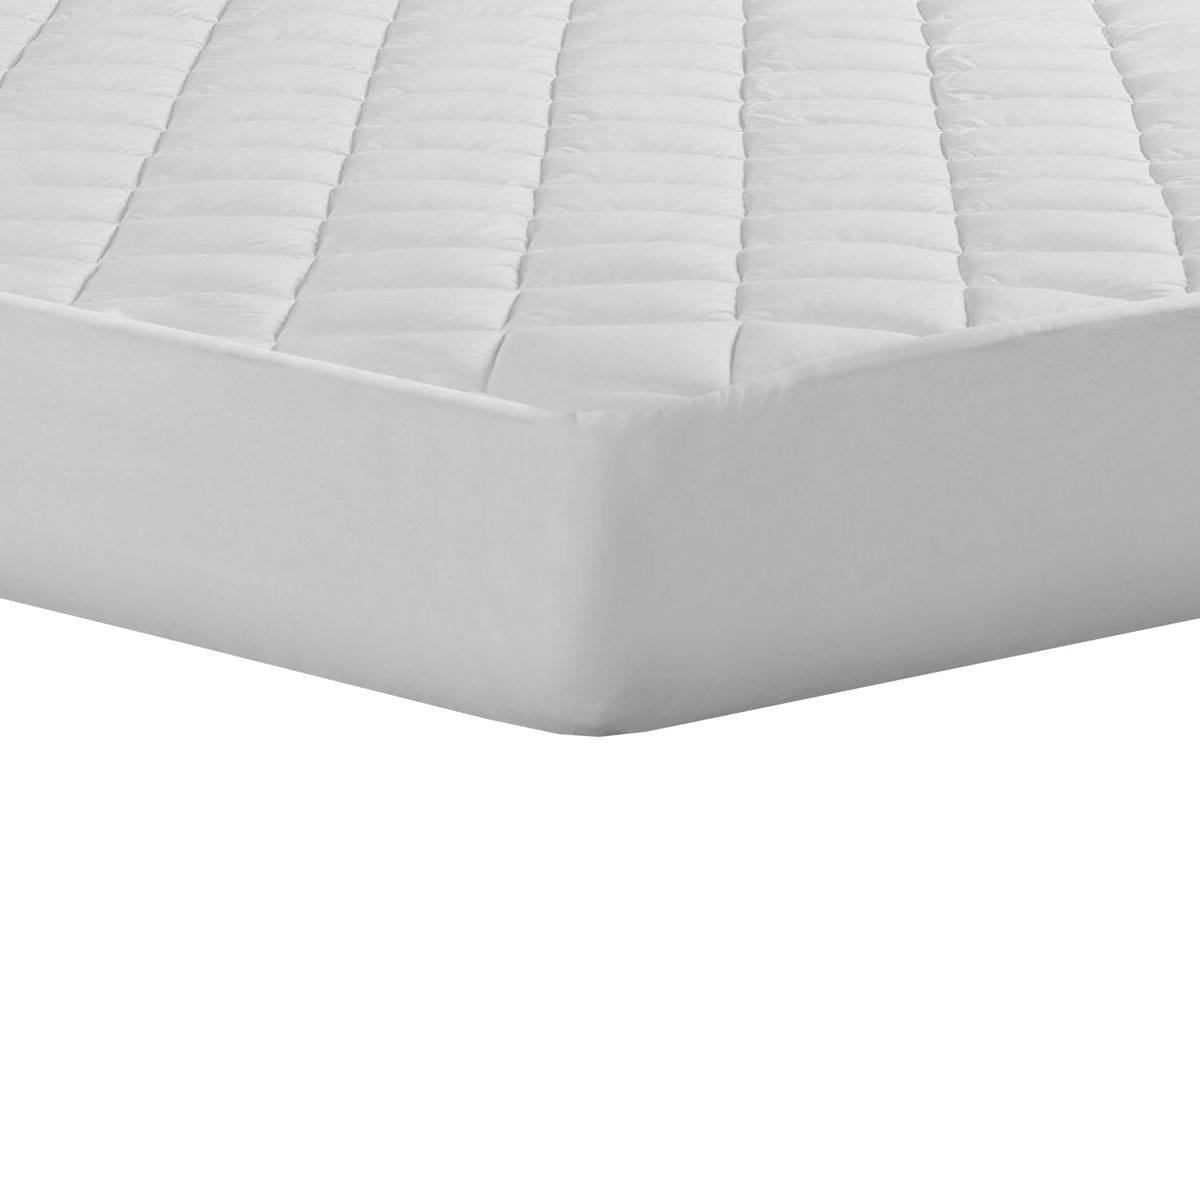 All-In-One Ultra-Fresh(tm) Treatment Fitted Mattress Pad